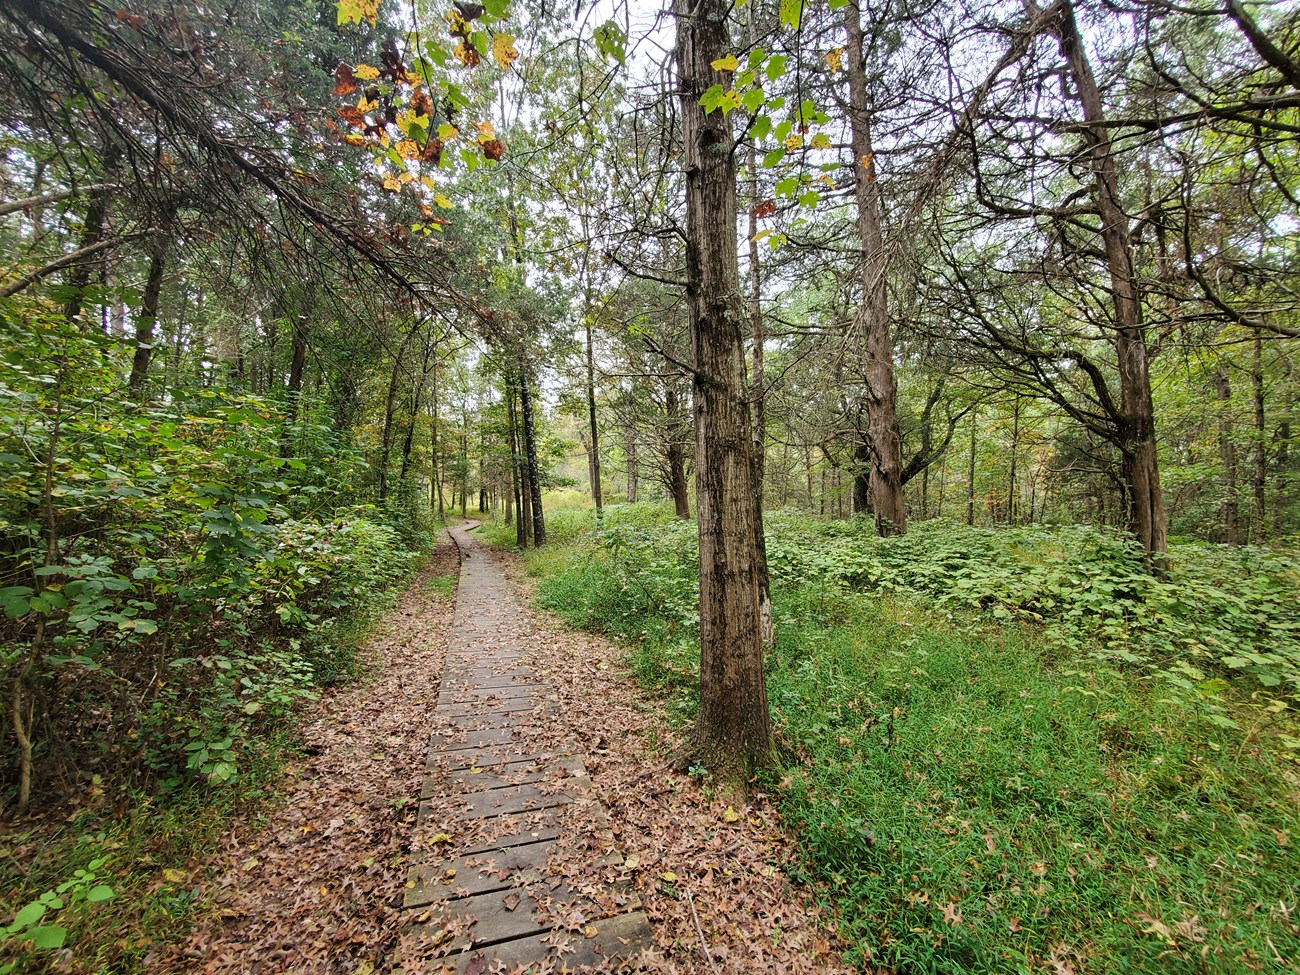 Unfinished Railroad Trail in summer. Trees and foliage are green and a brown dirt trail sits in the center of the photo.